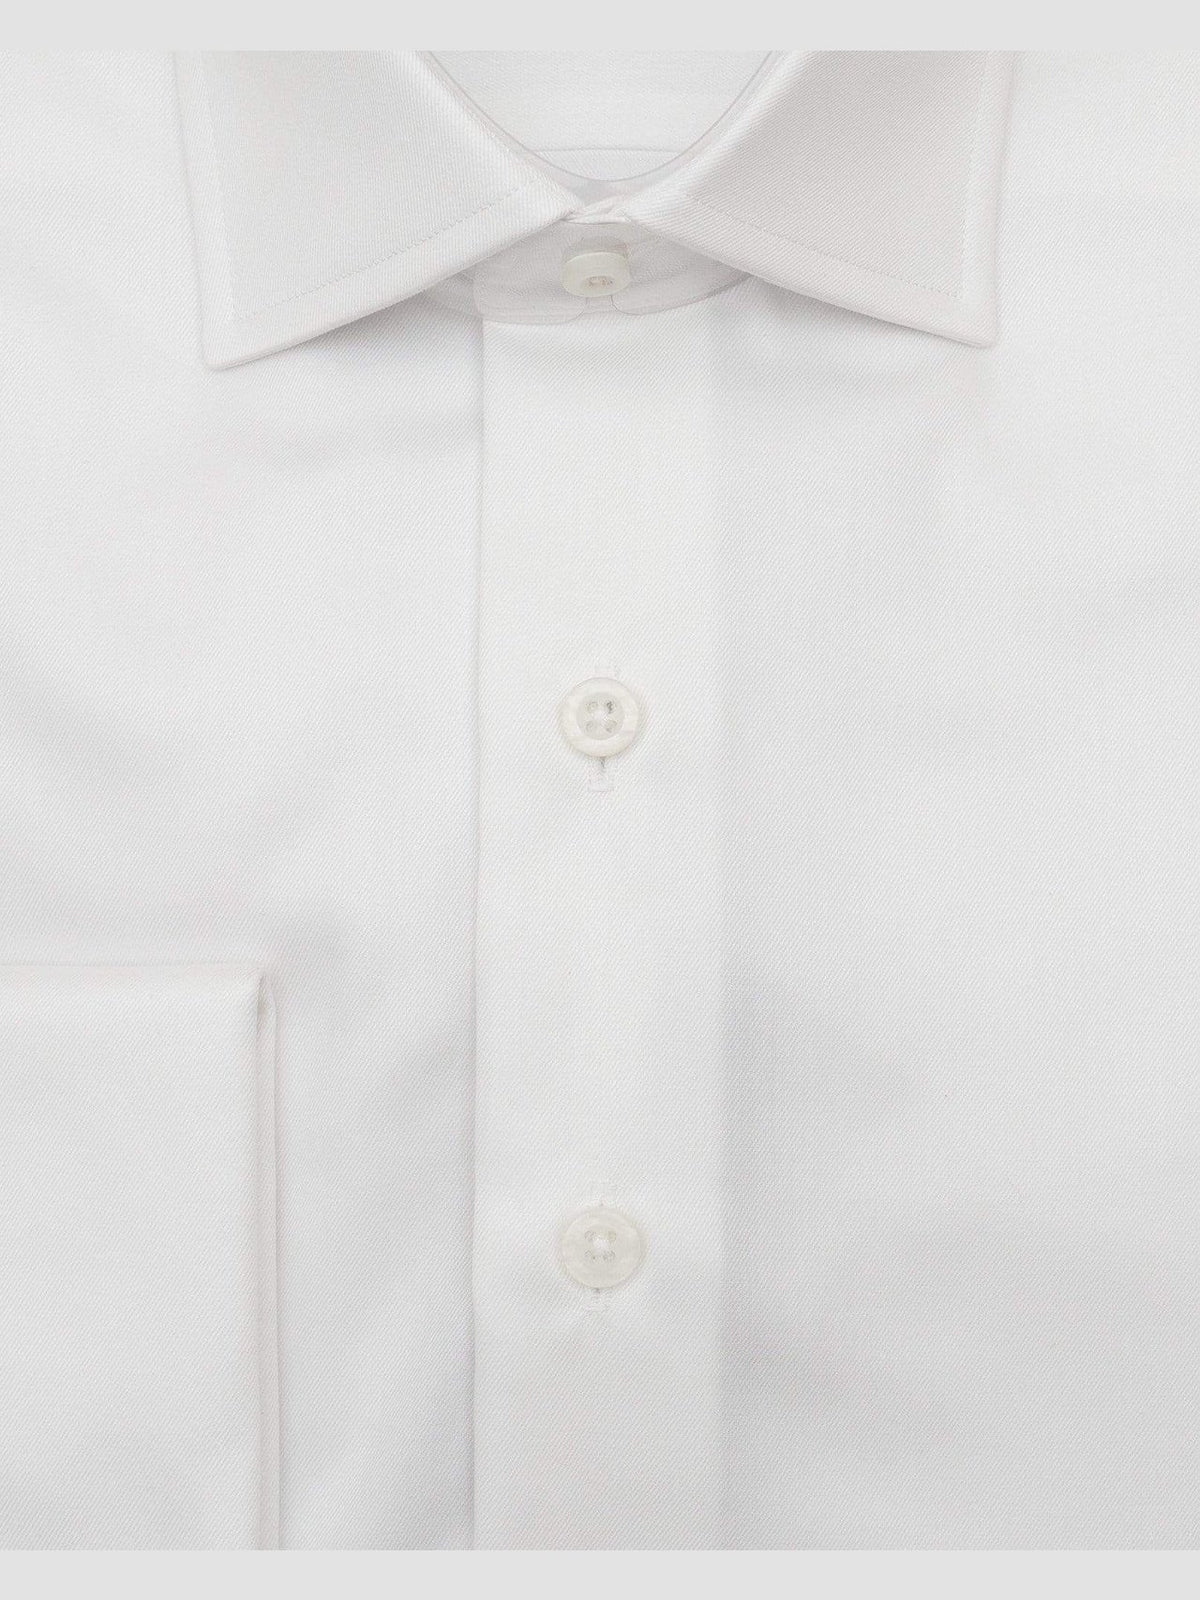 Brand P SHIRTS Mens Cotton Solid White Slim Fit Spread Collar Wrinkle Free Dress Shirt